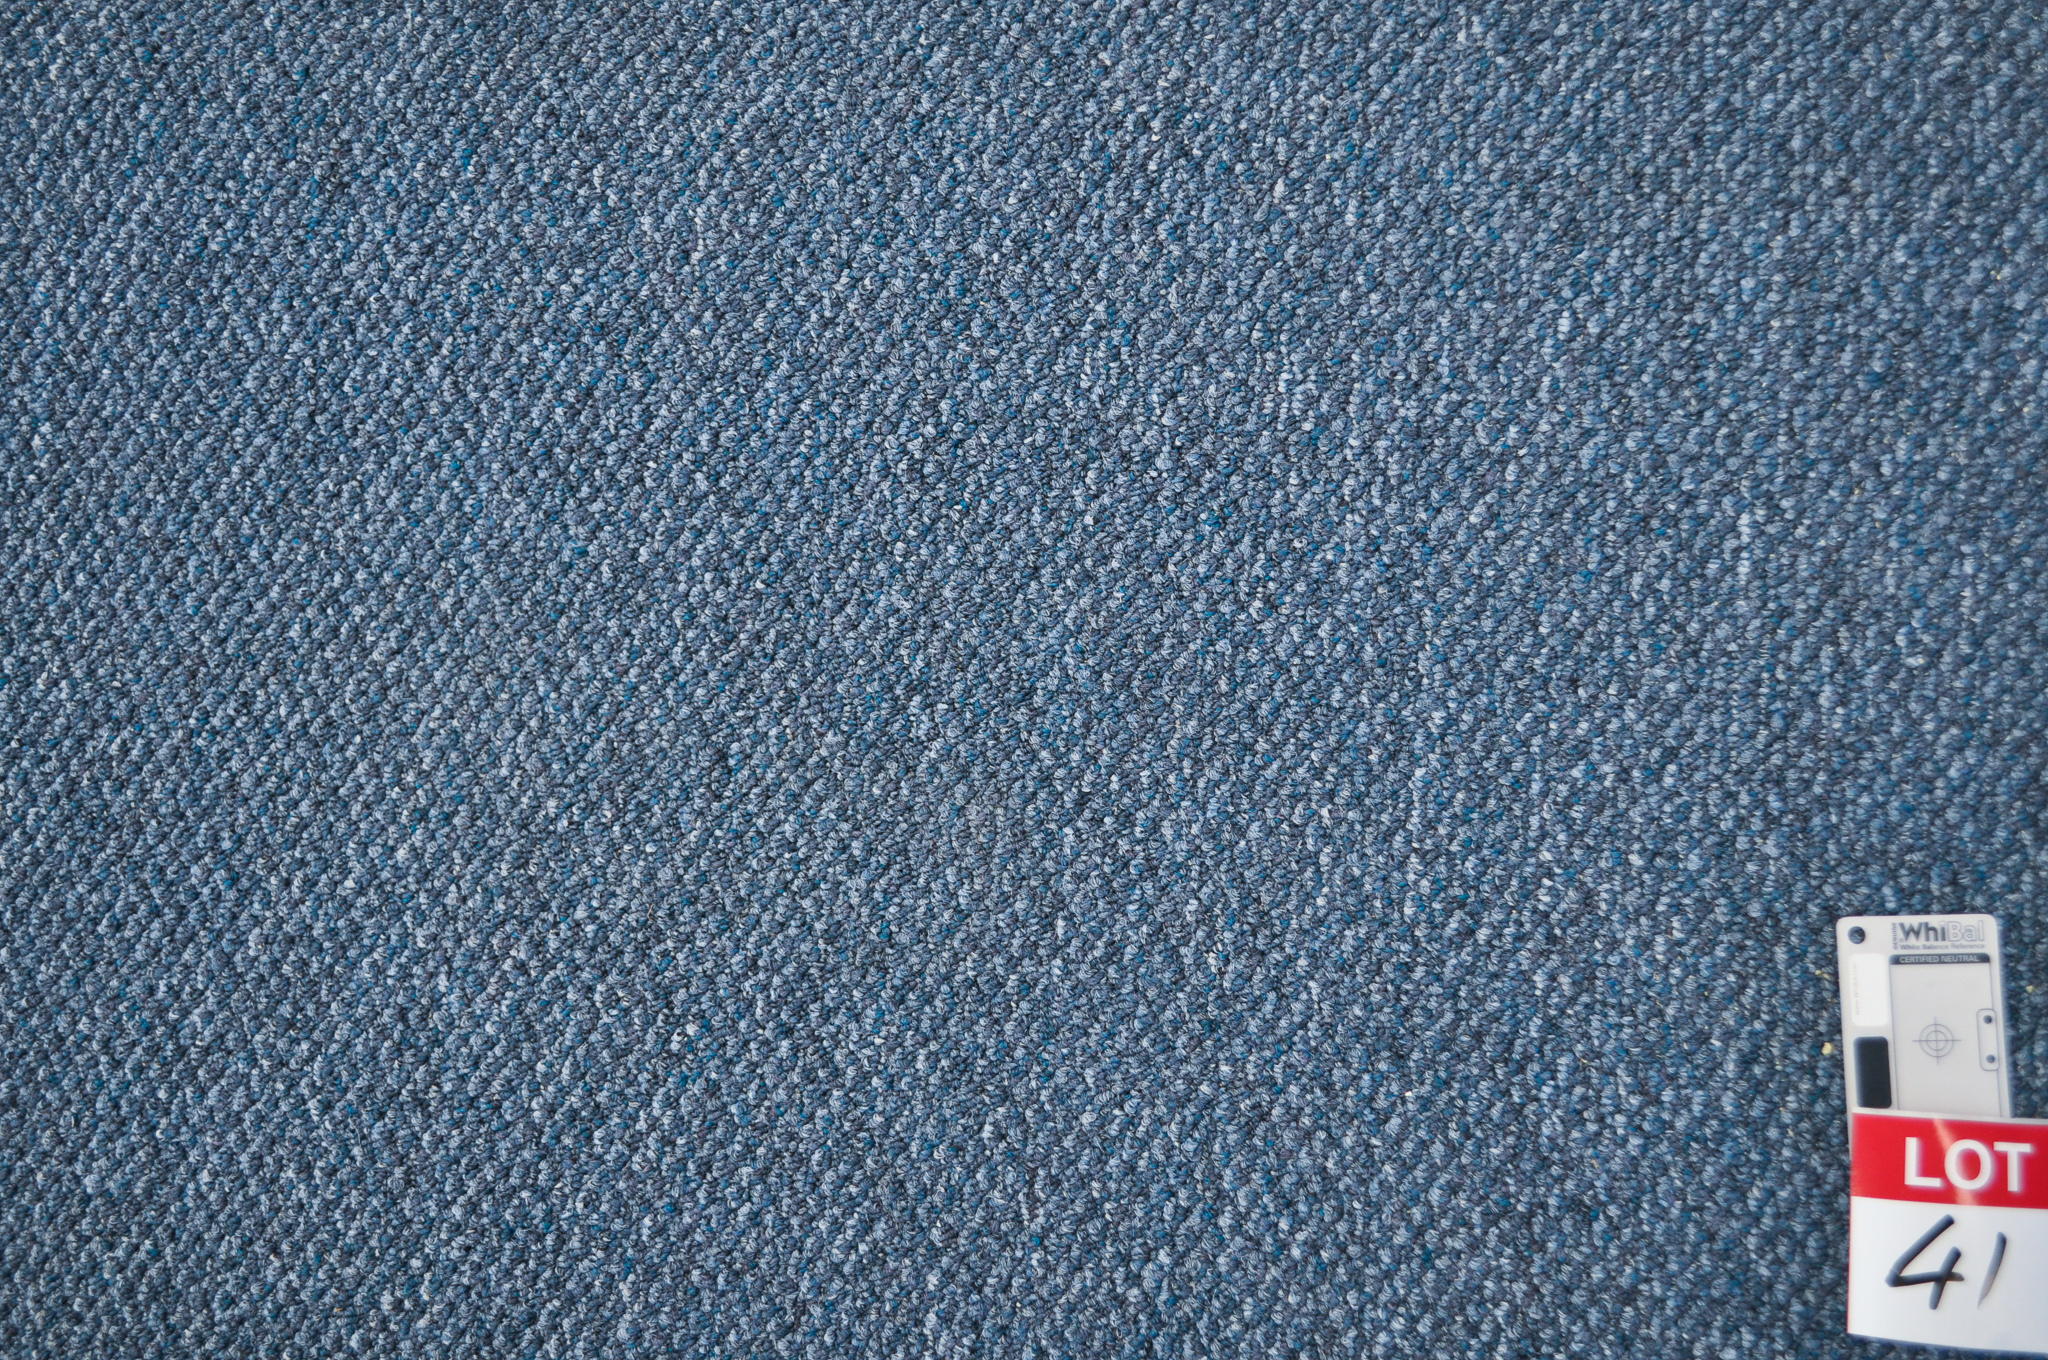 blue colored, modulated pile roll of carpet on sale at Concord Floors, it being a remnant roll in Concord Floor's warehouse.